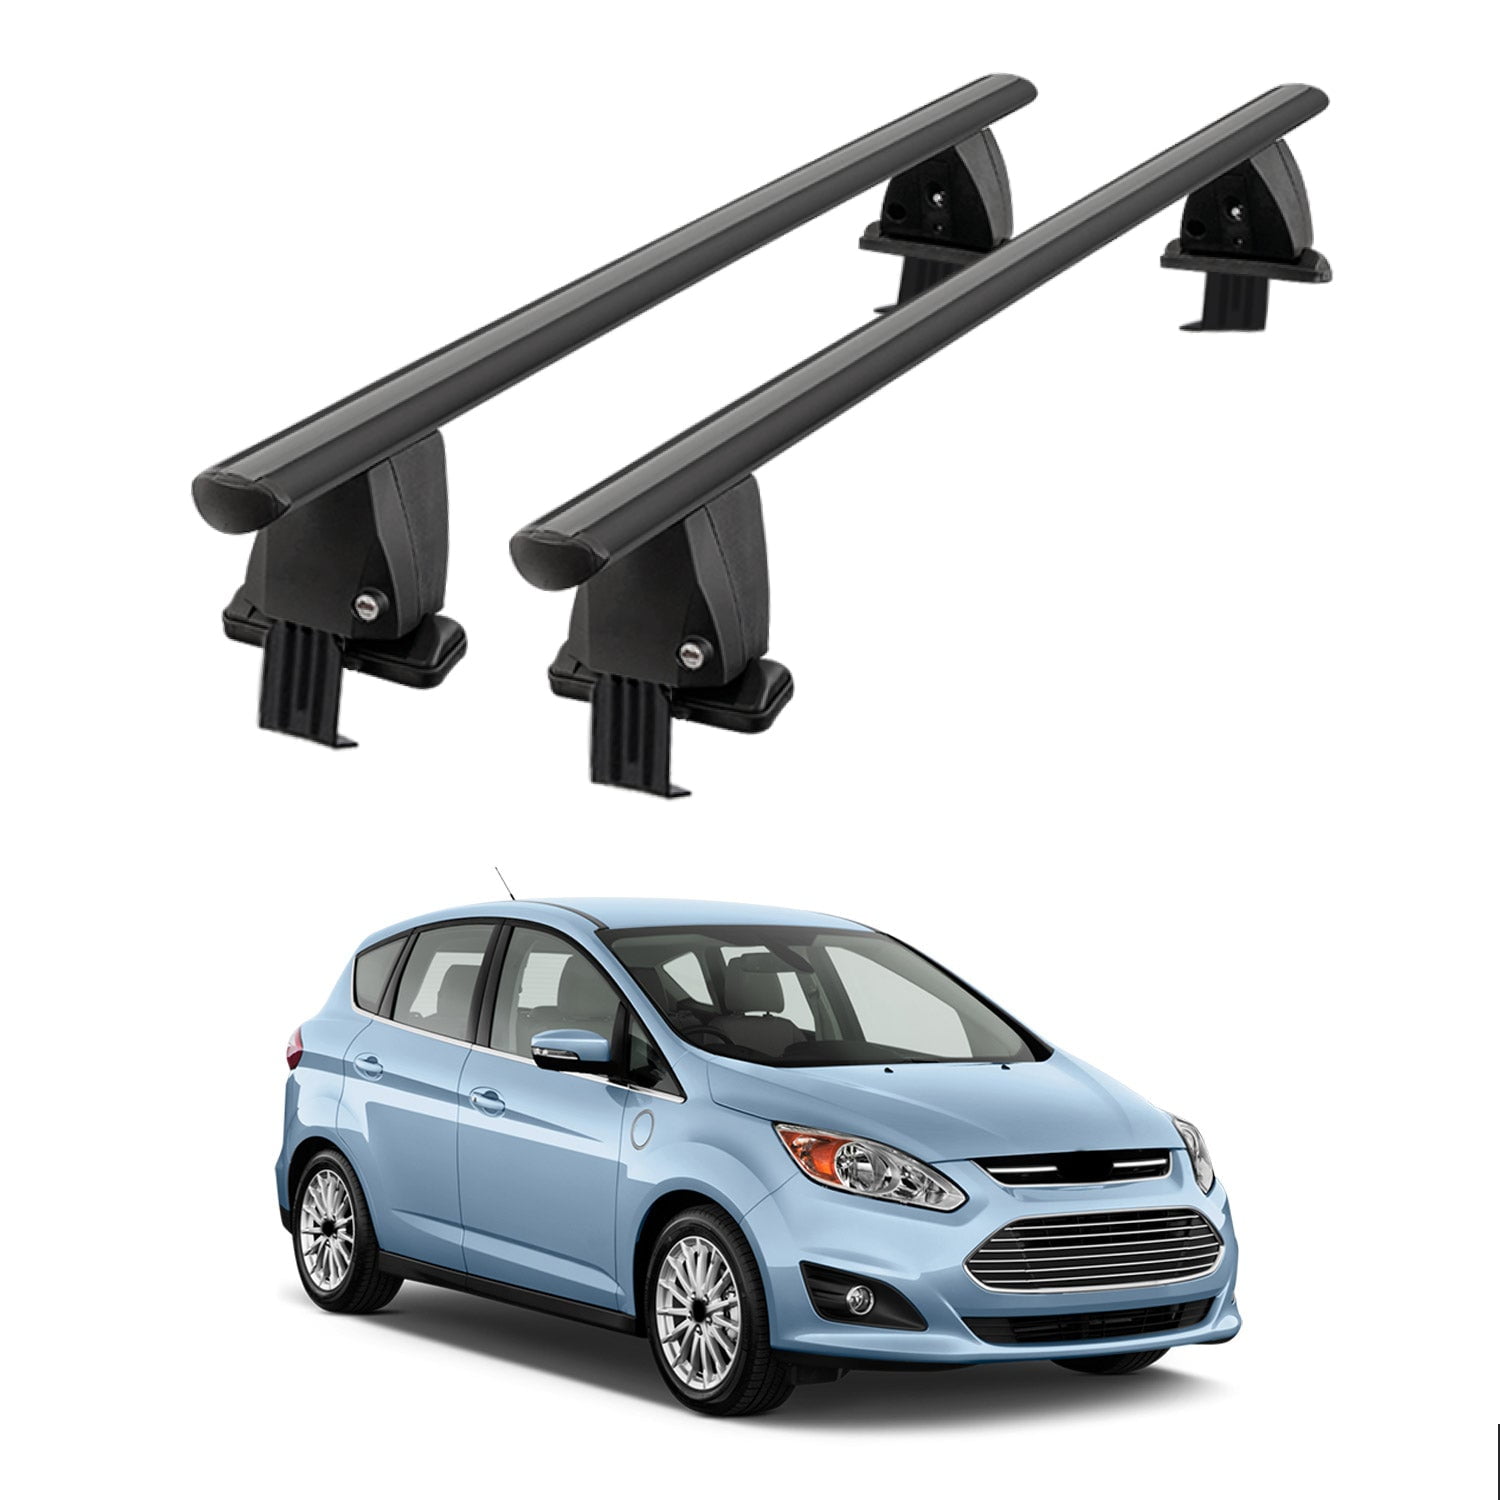 OMAC USA Smooth Top Roof Rack for Ford C-Max 2012-2018 Specific Cross ...